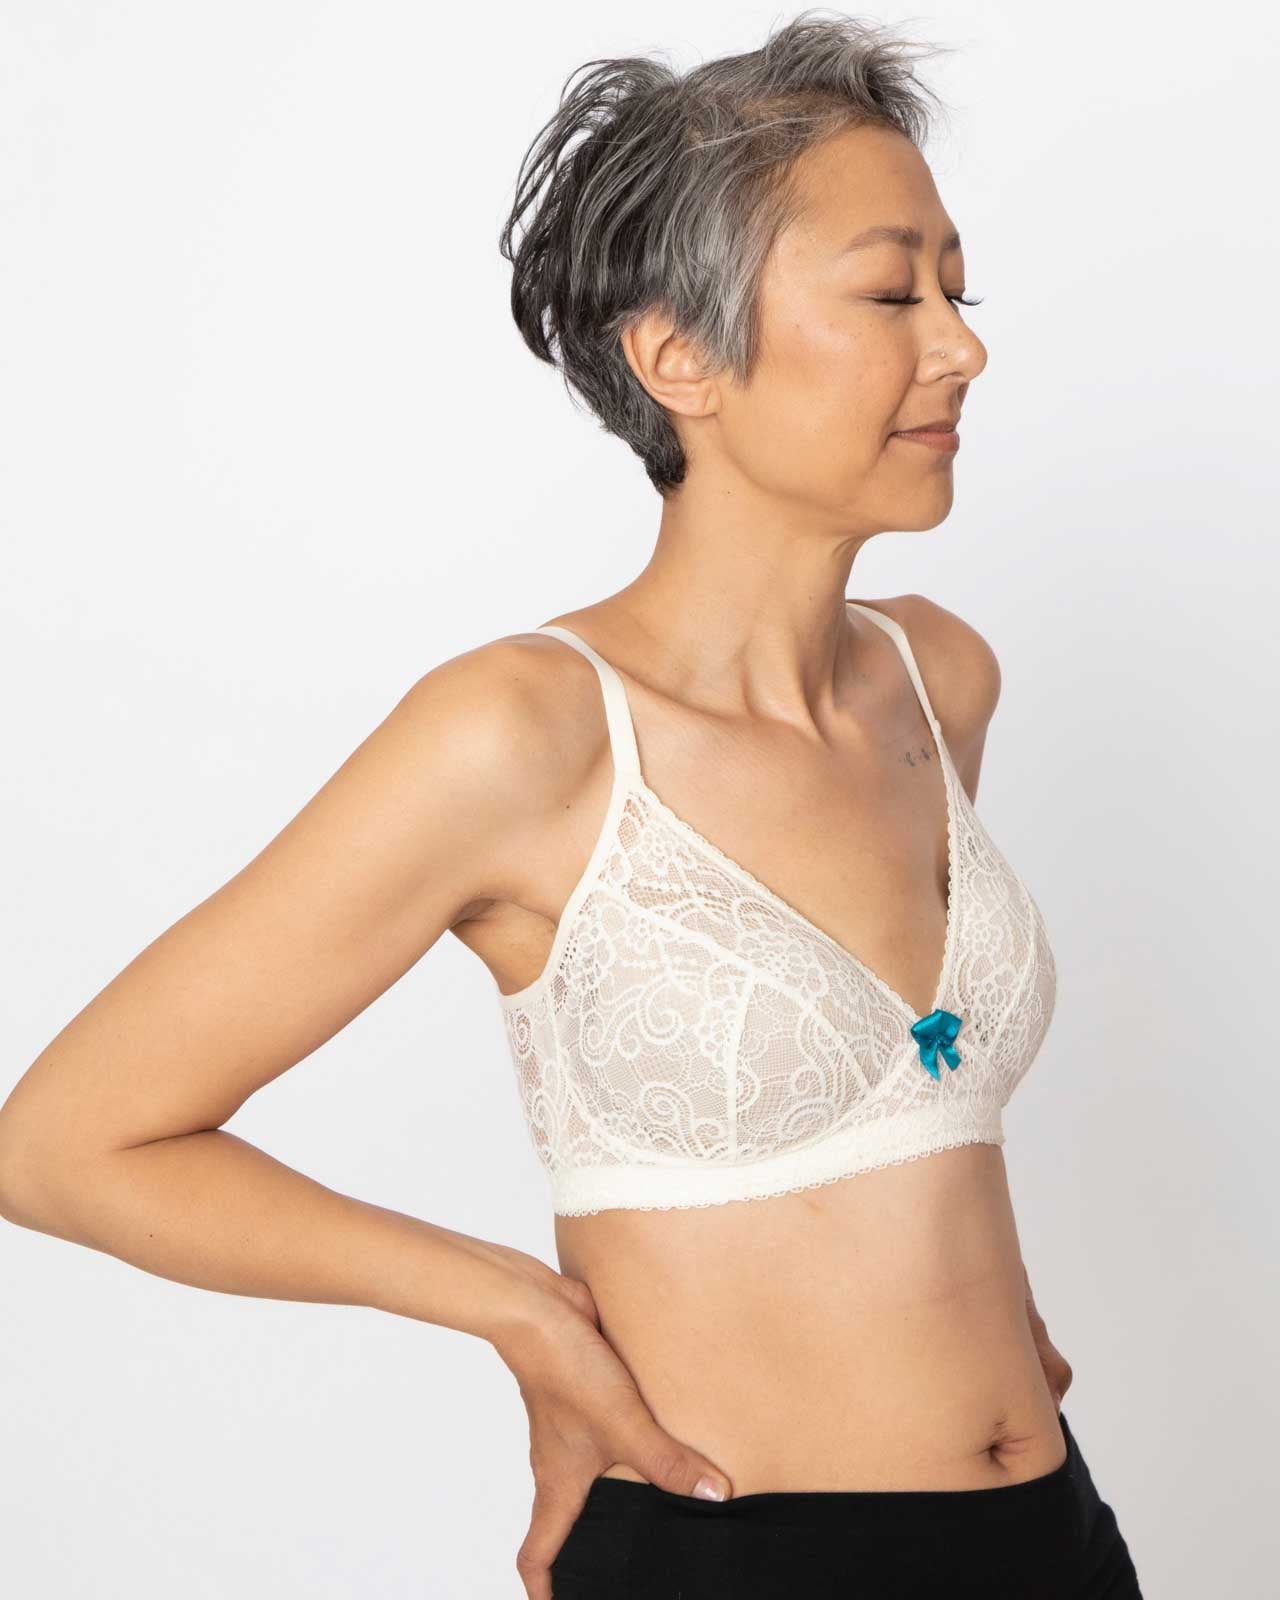 The Natrelle® Inspires Lace Bralette